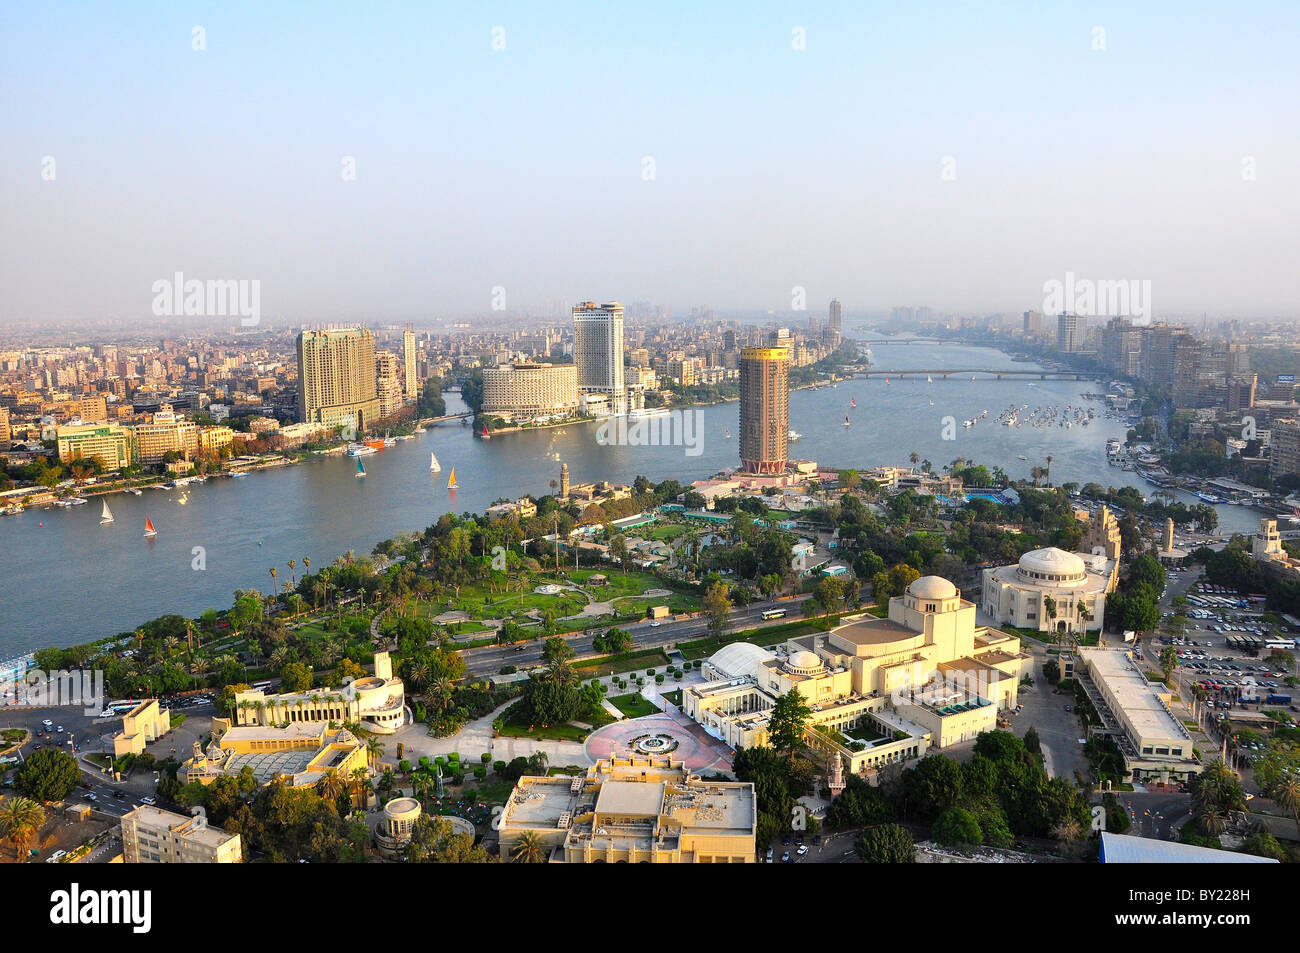 View of the Nile River in Cairo, Egypt Stock Photo